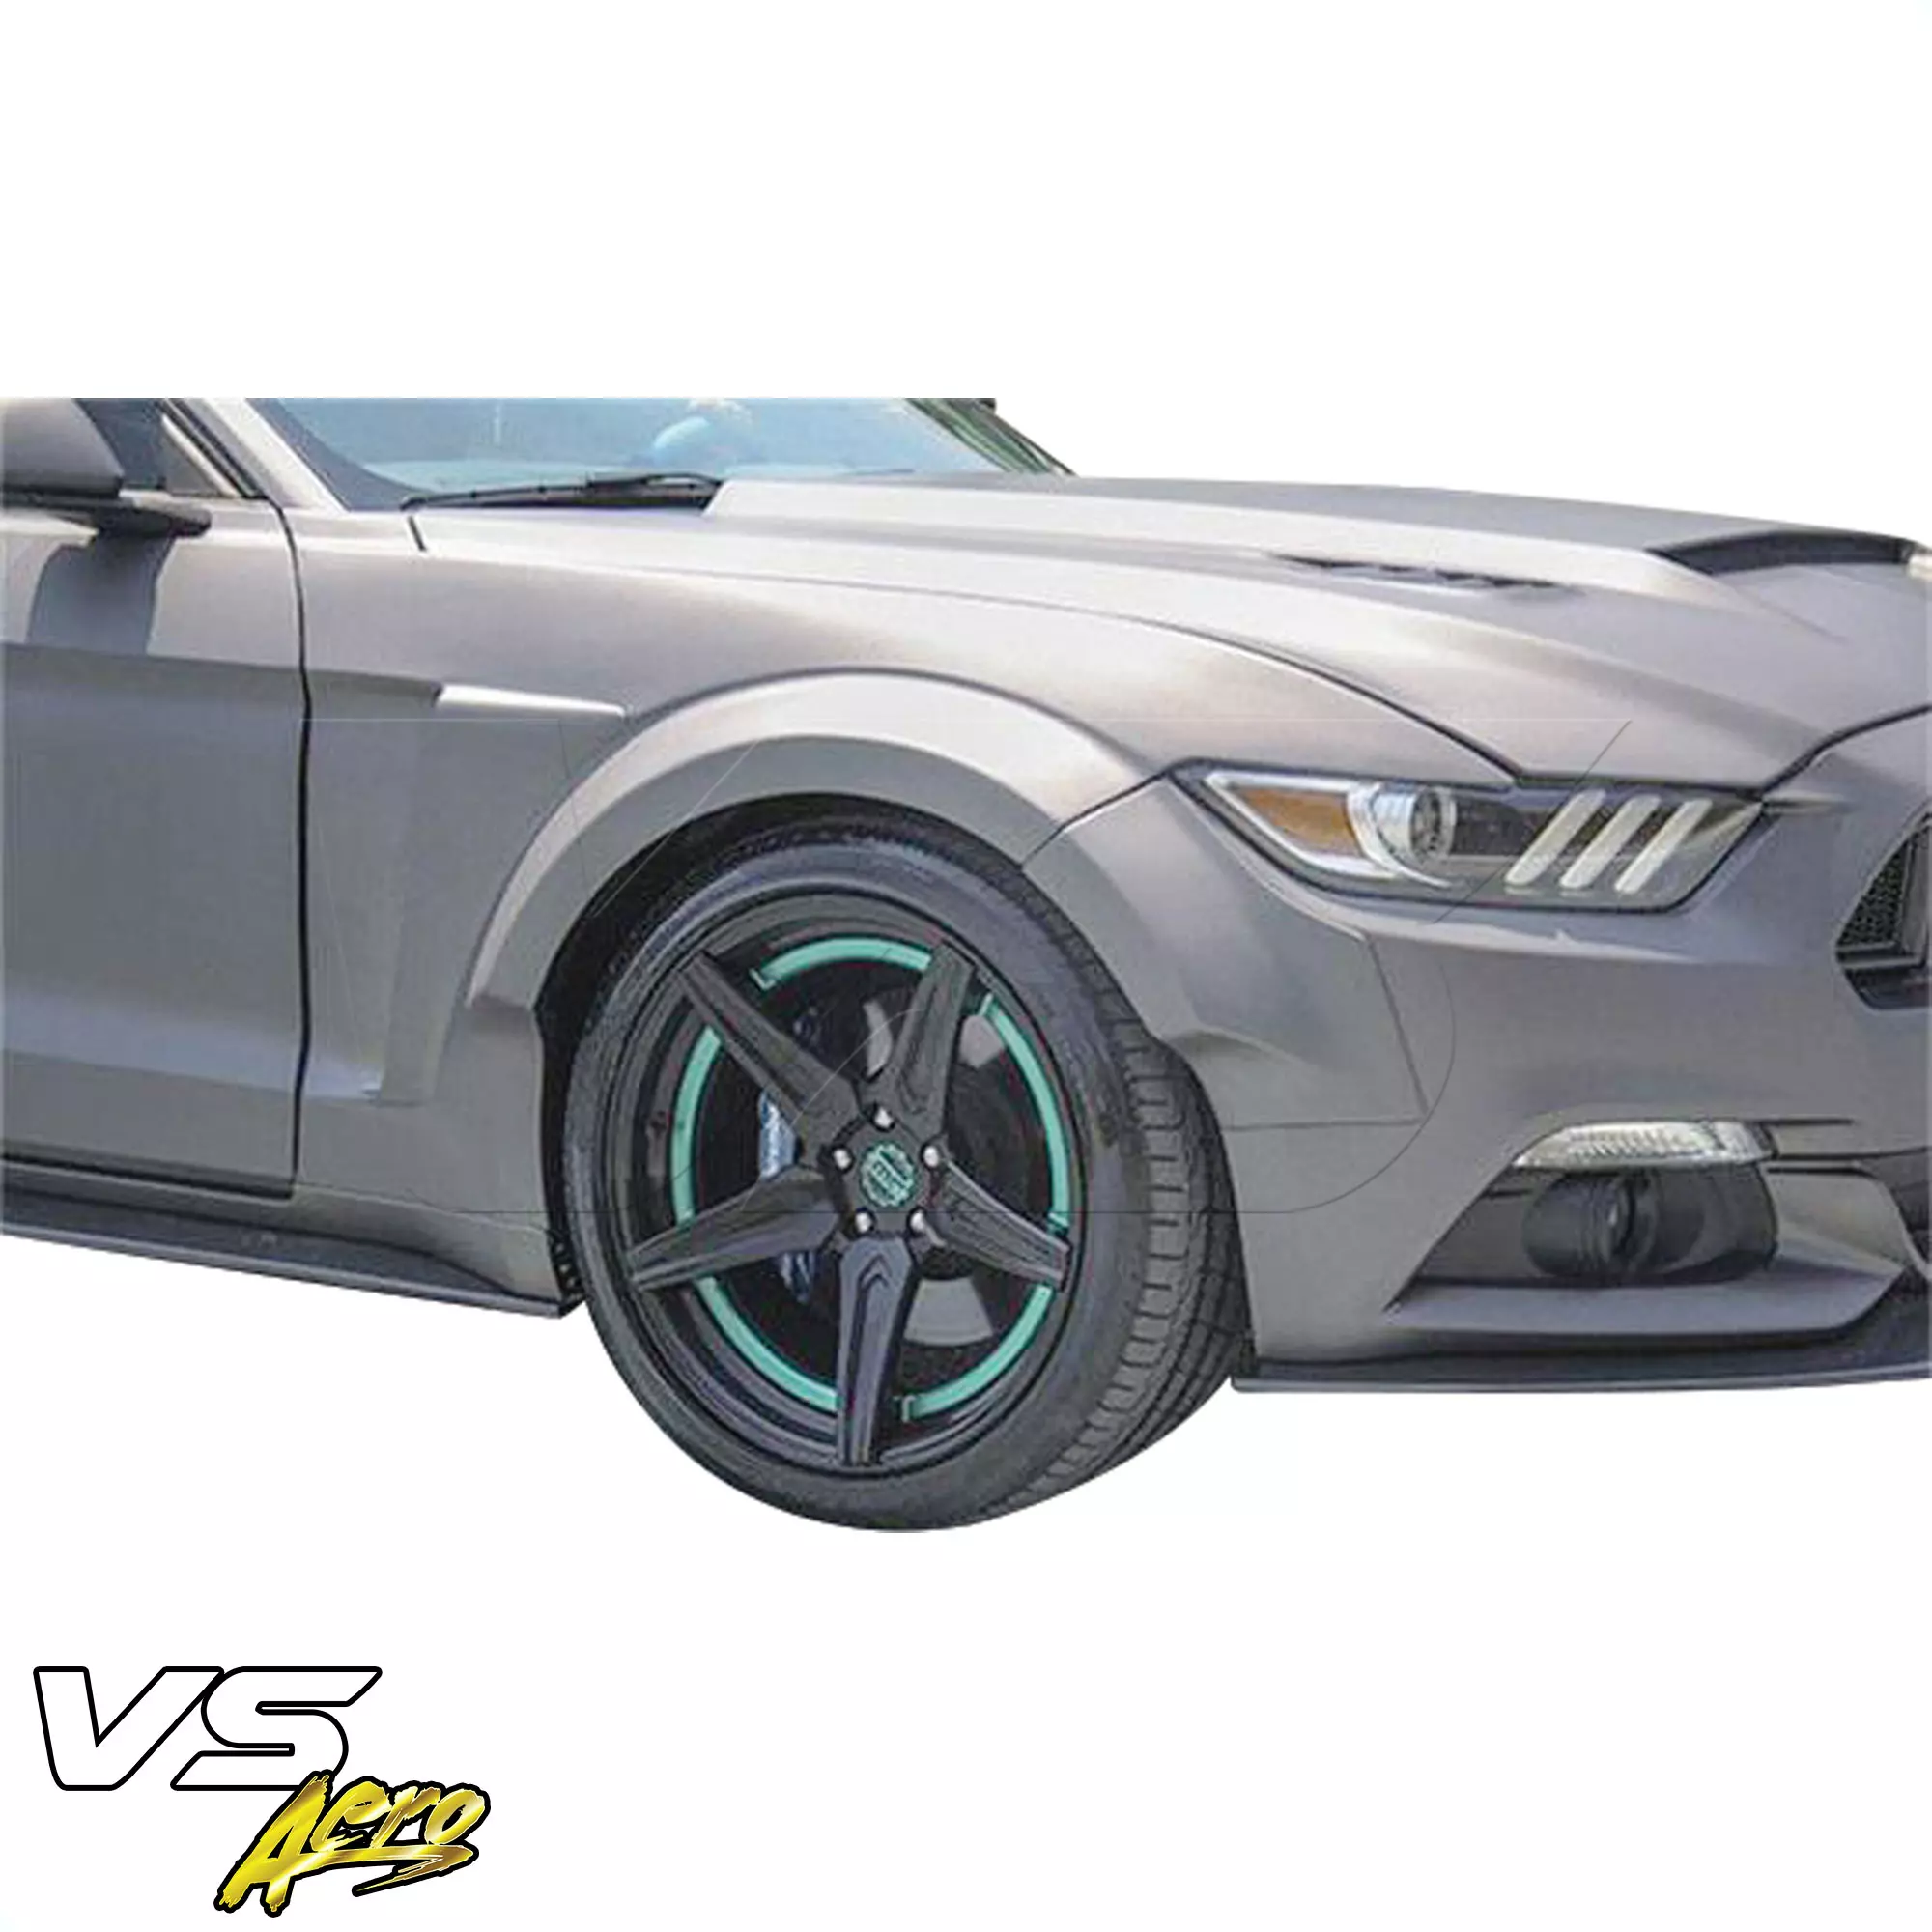 VSaero FRP KTOT Wide Body Fenders (front) > Ford Mustang 2015-2020 - Image 7